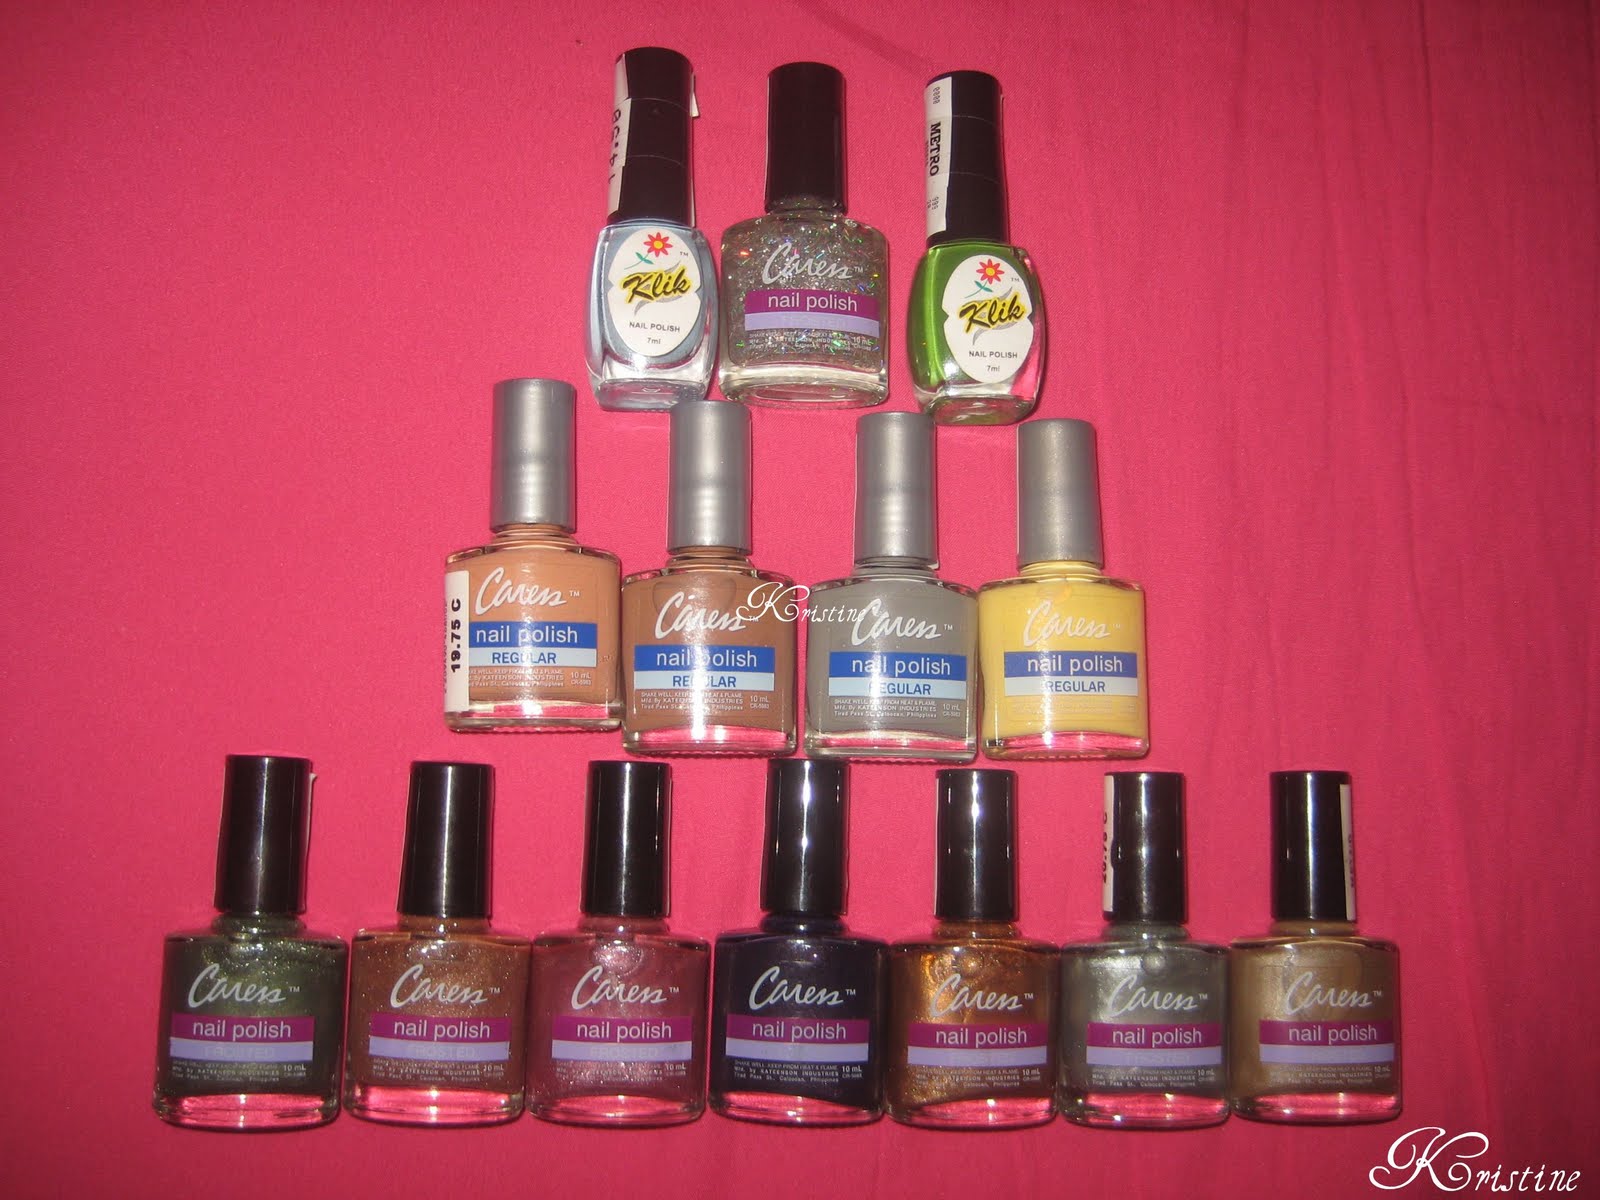 One of my favorite Philippine drugstore nail polish brand is Caress